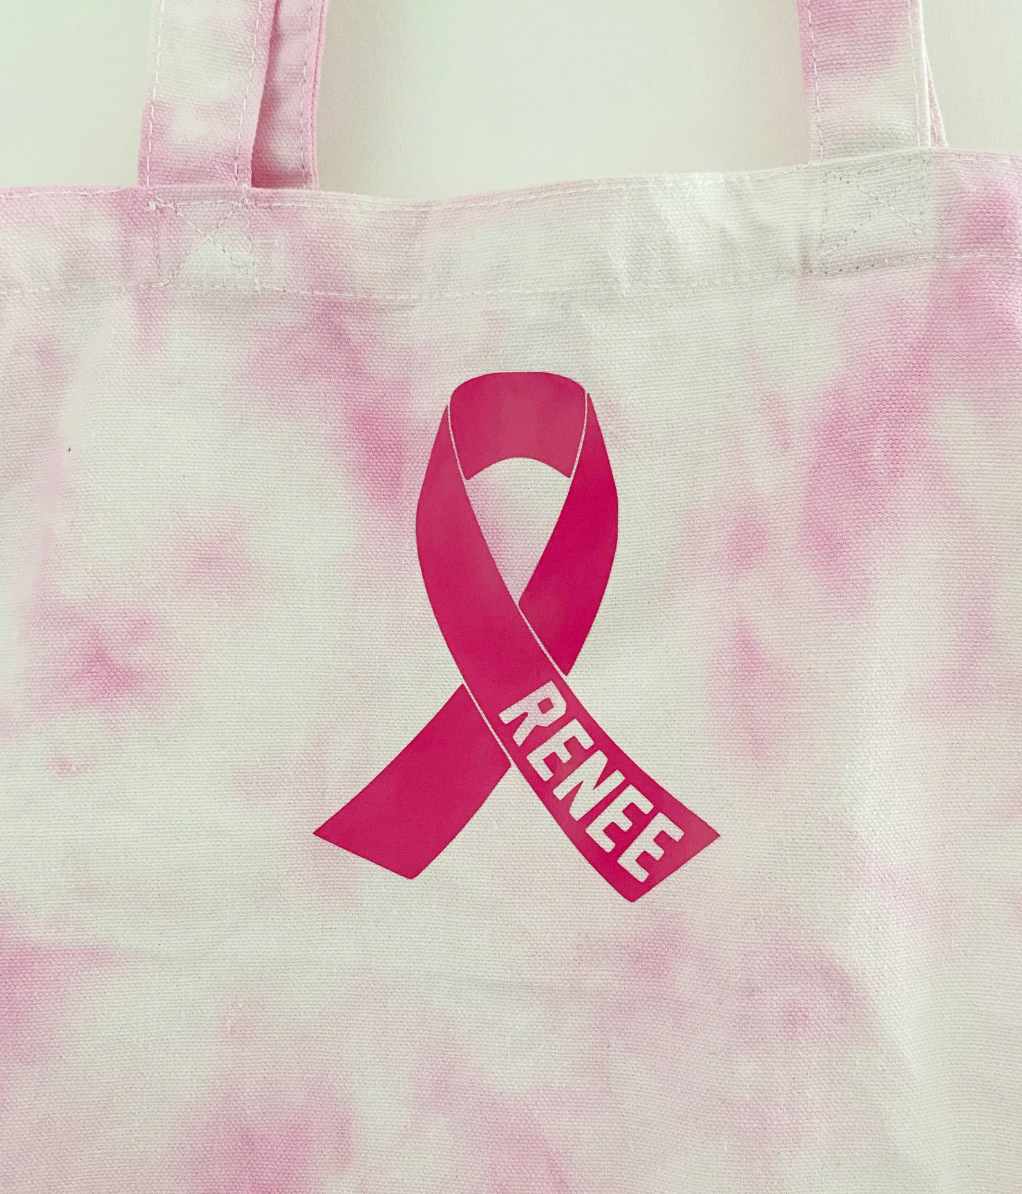 Load image into Gallery viewer, BCA TOTE ♡ pink tote with personalizable ribbon
